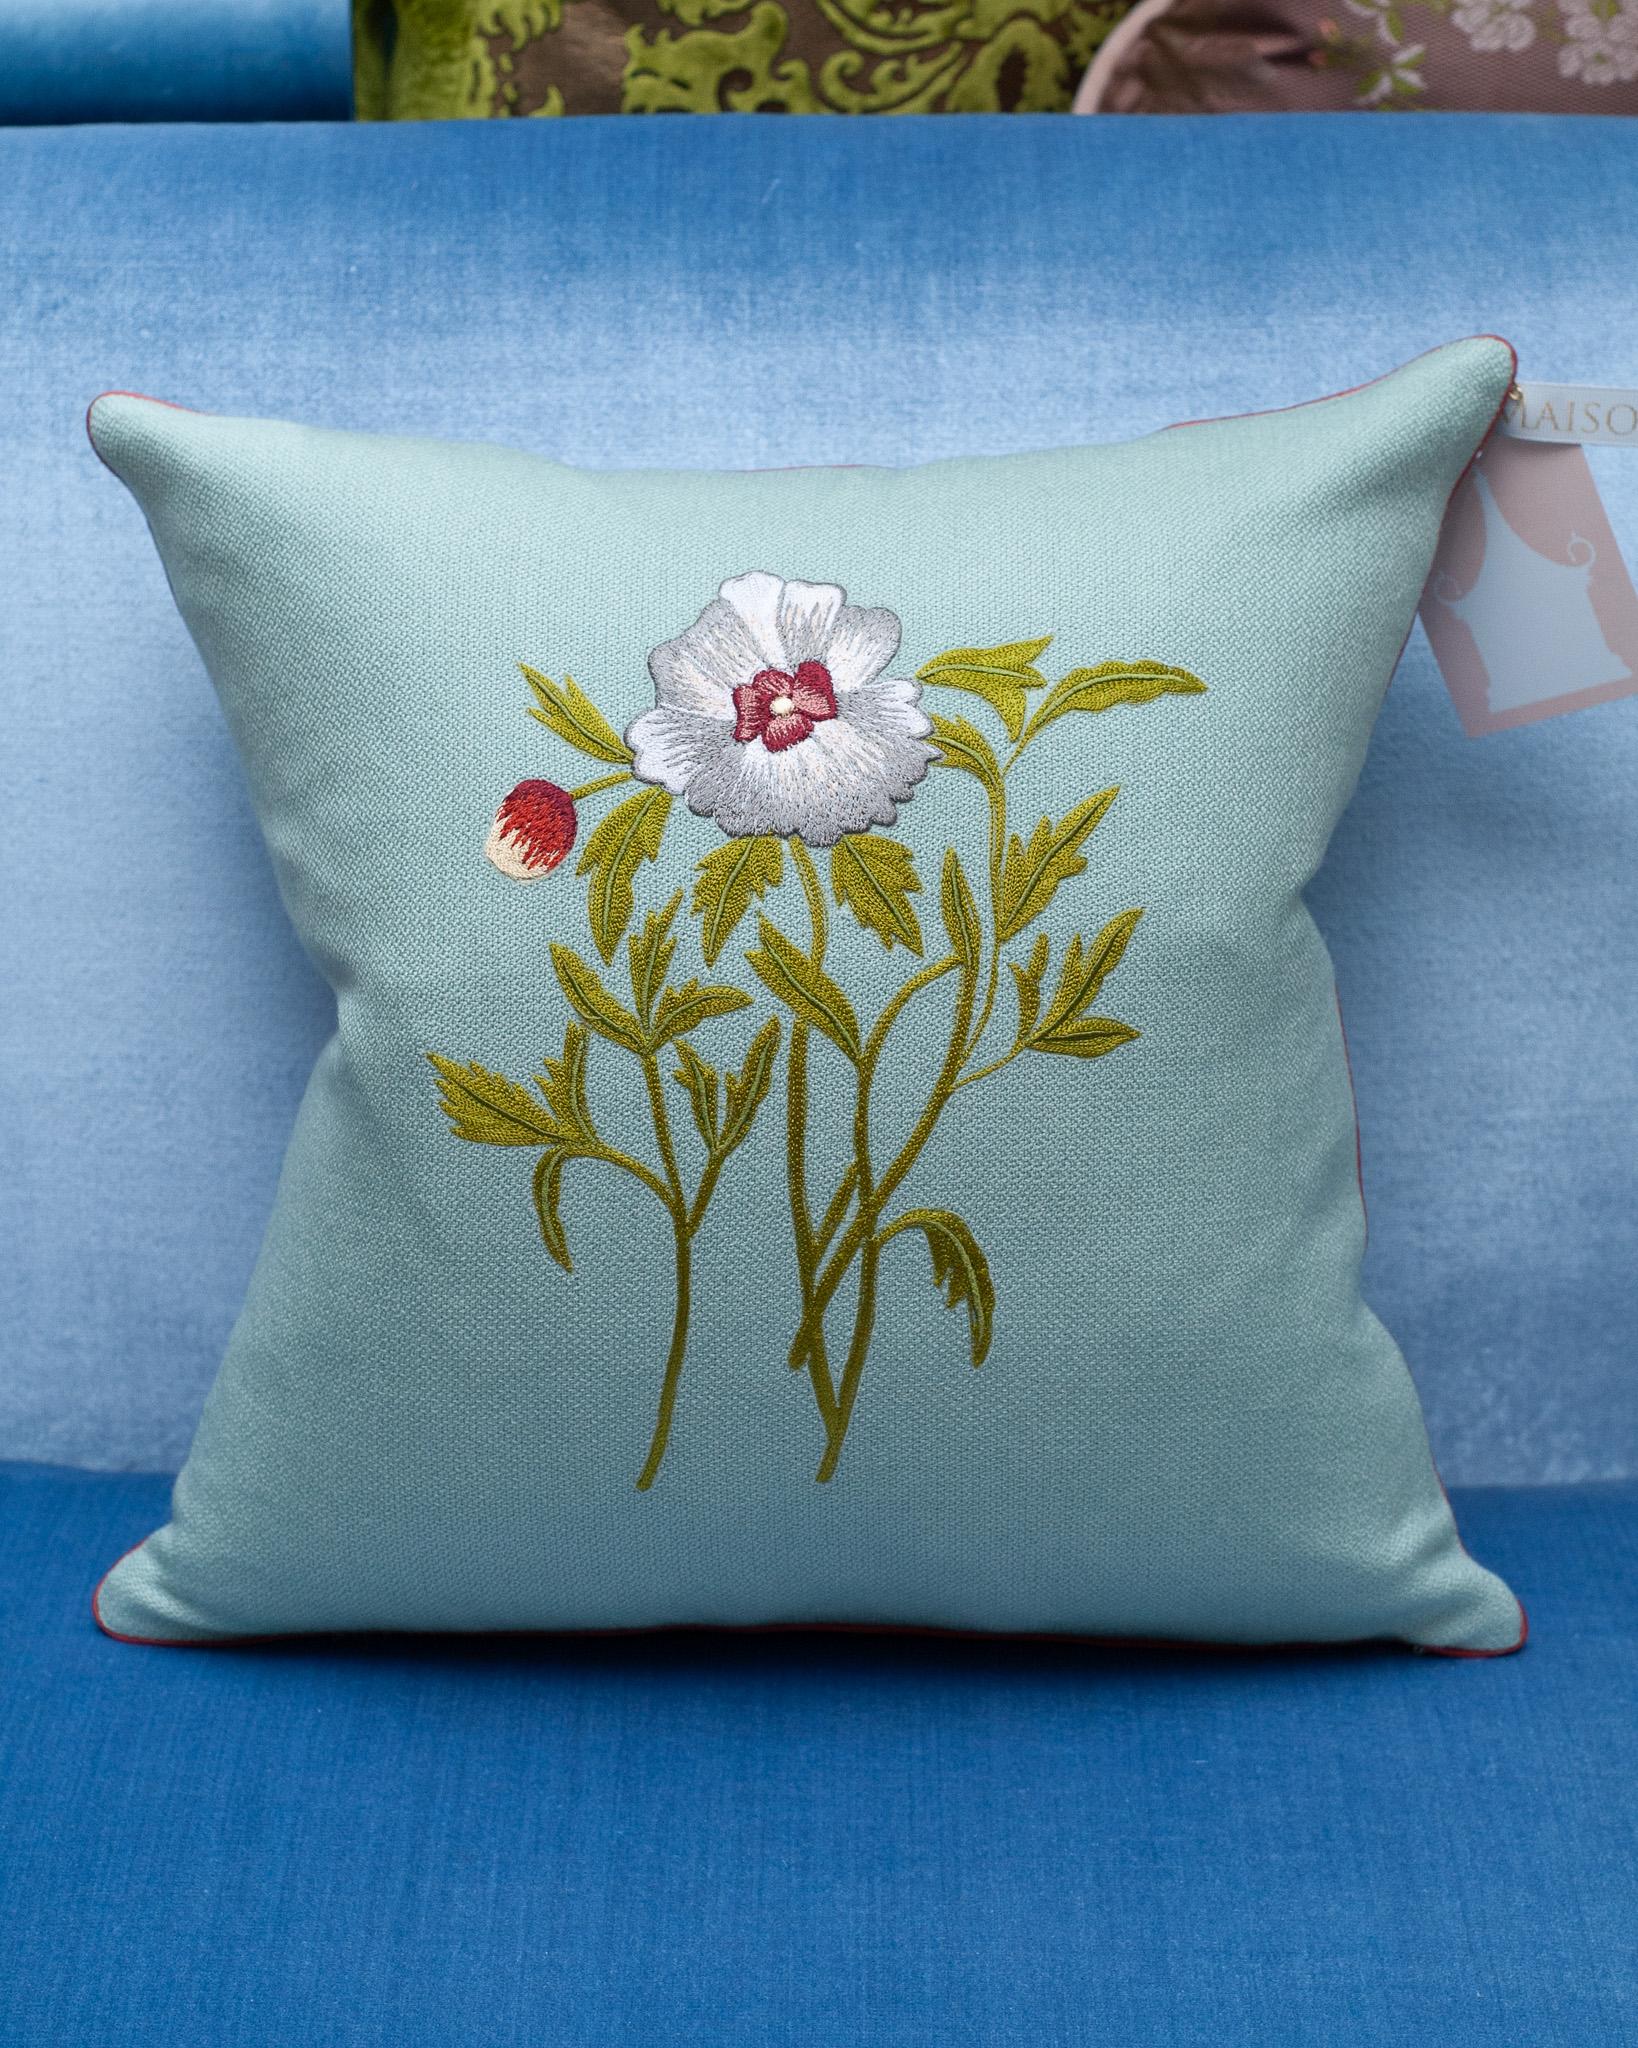 A stunning contemporary soft blue merino wool and linen pillow, trimmed with red piping and embroidered in wool with a single flower motif. Filled with the highest quality Canadian down and feather for a pillow that feels as luxurious as it is